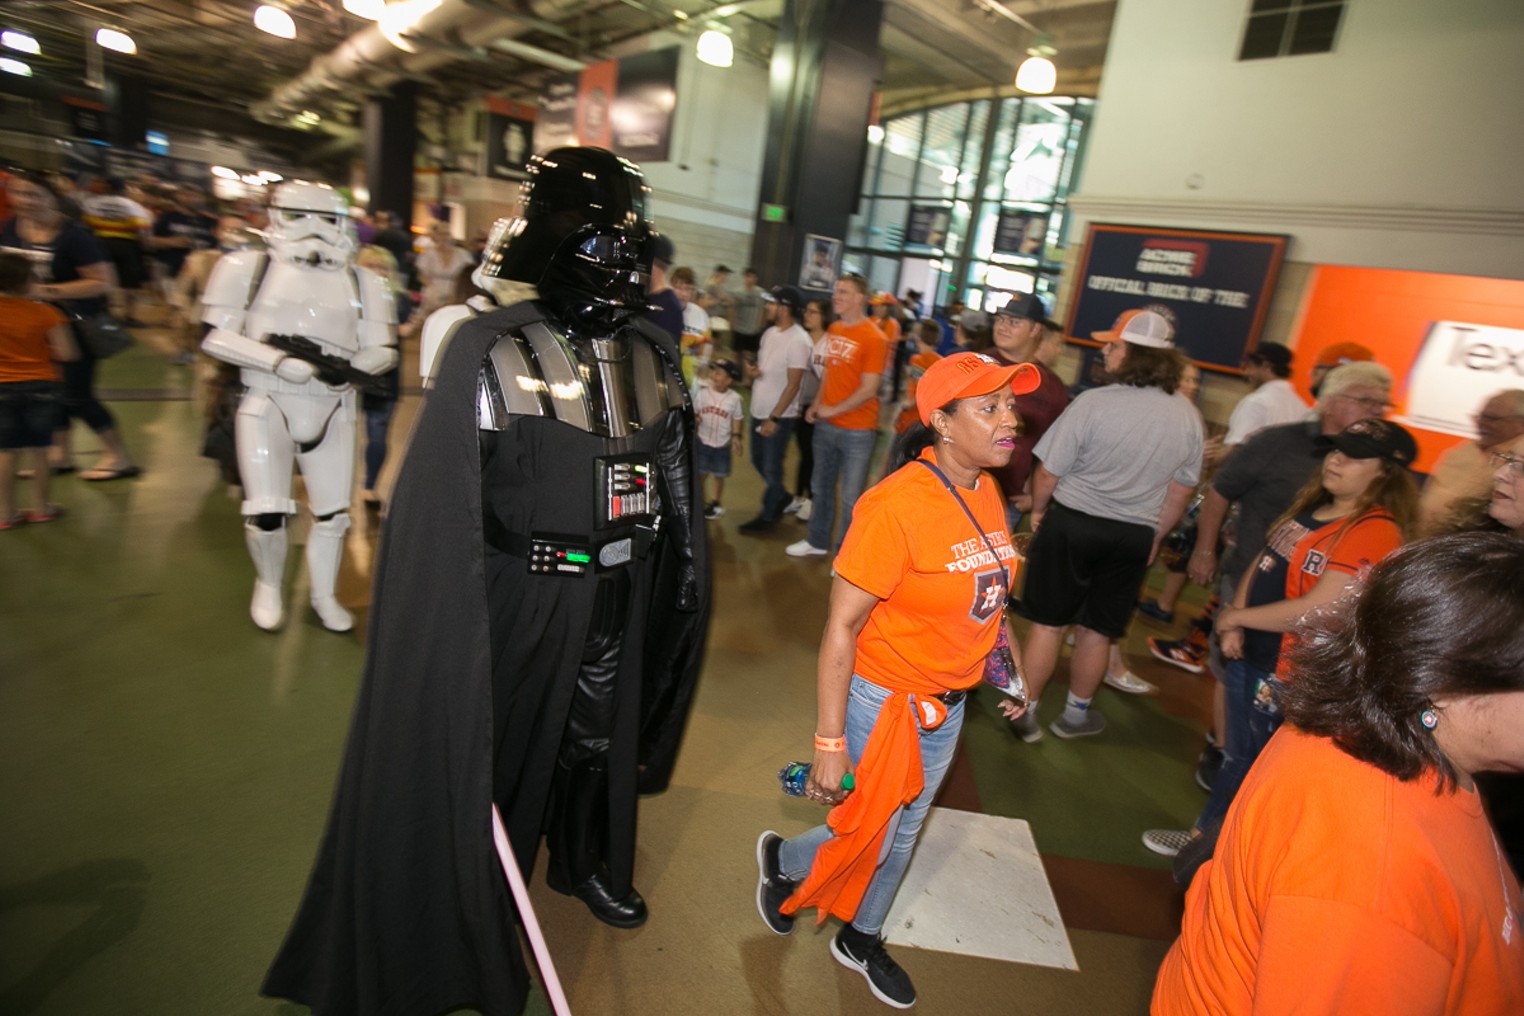 Astros Shirt Join The Astros Side Darth Vader Houston Astros Gift